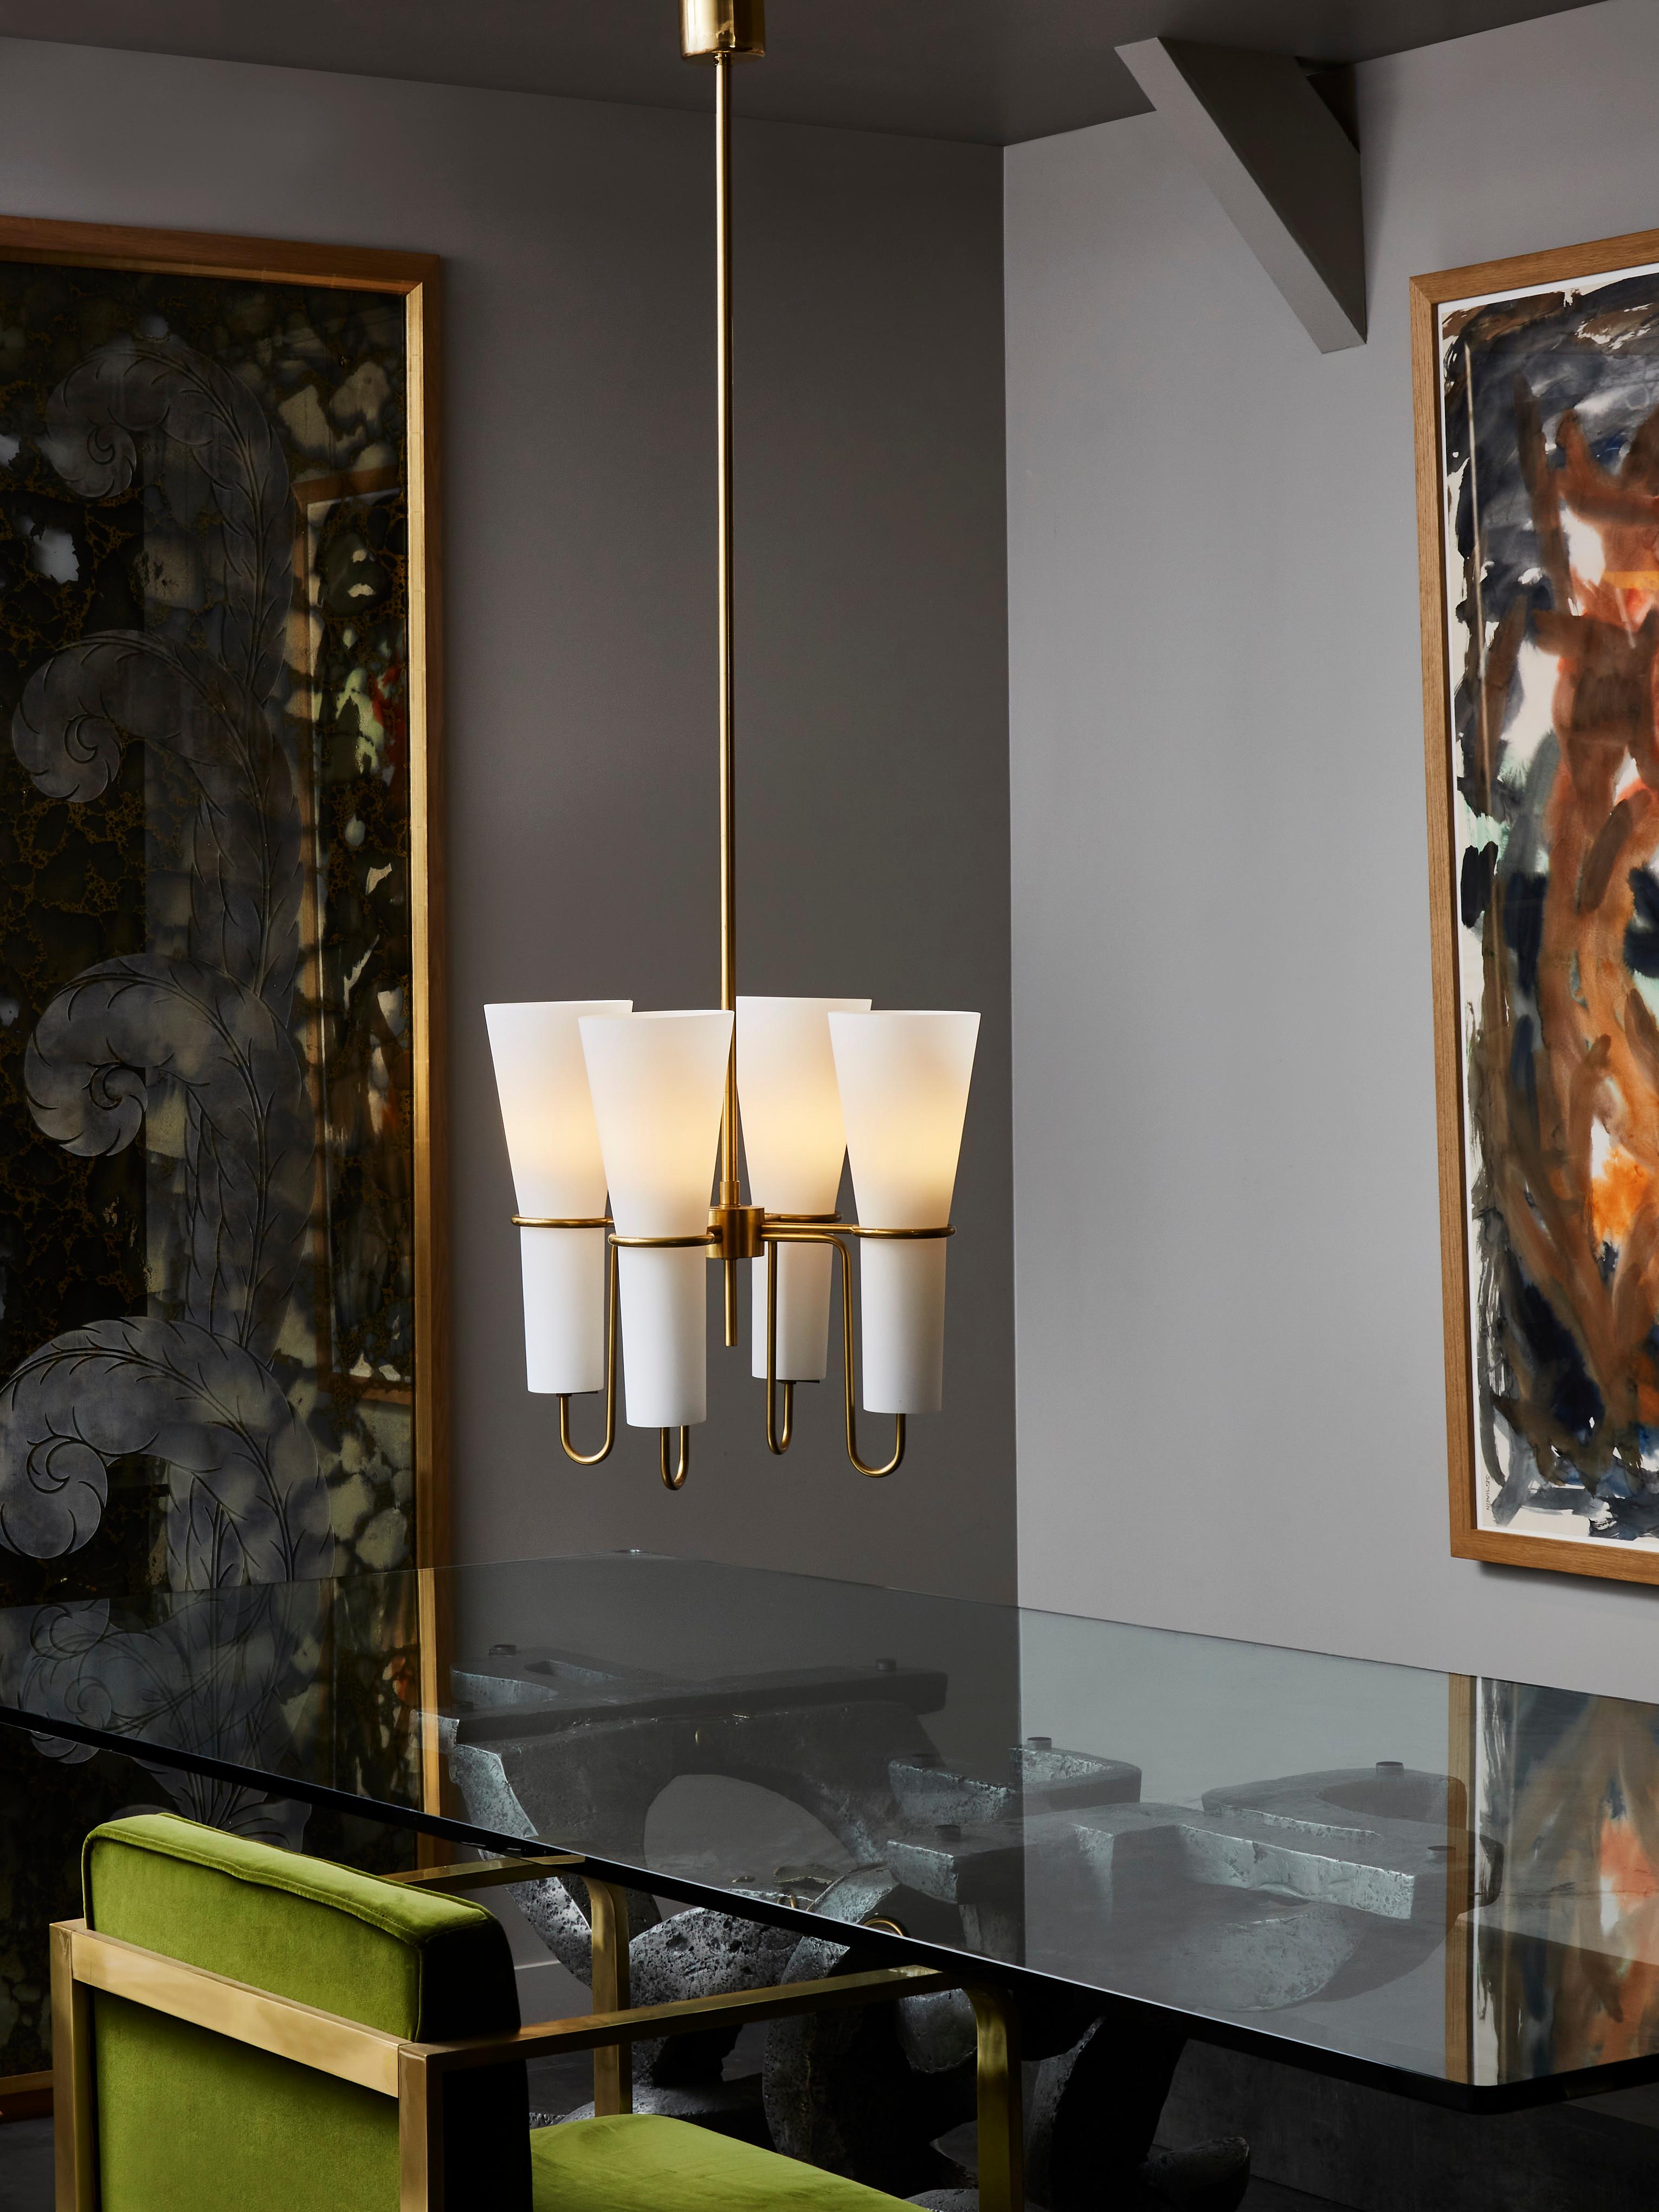 Tall chandelier designed by Hans-Agne Jakobsson made of a brass structure holding four opaline glass sconce.